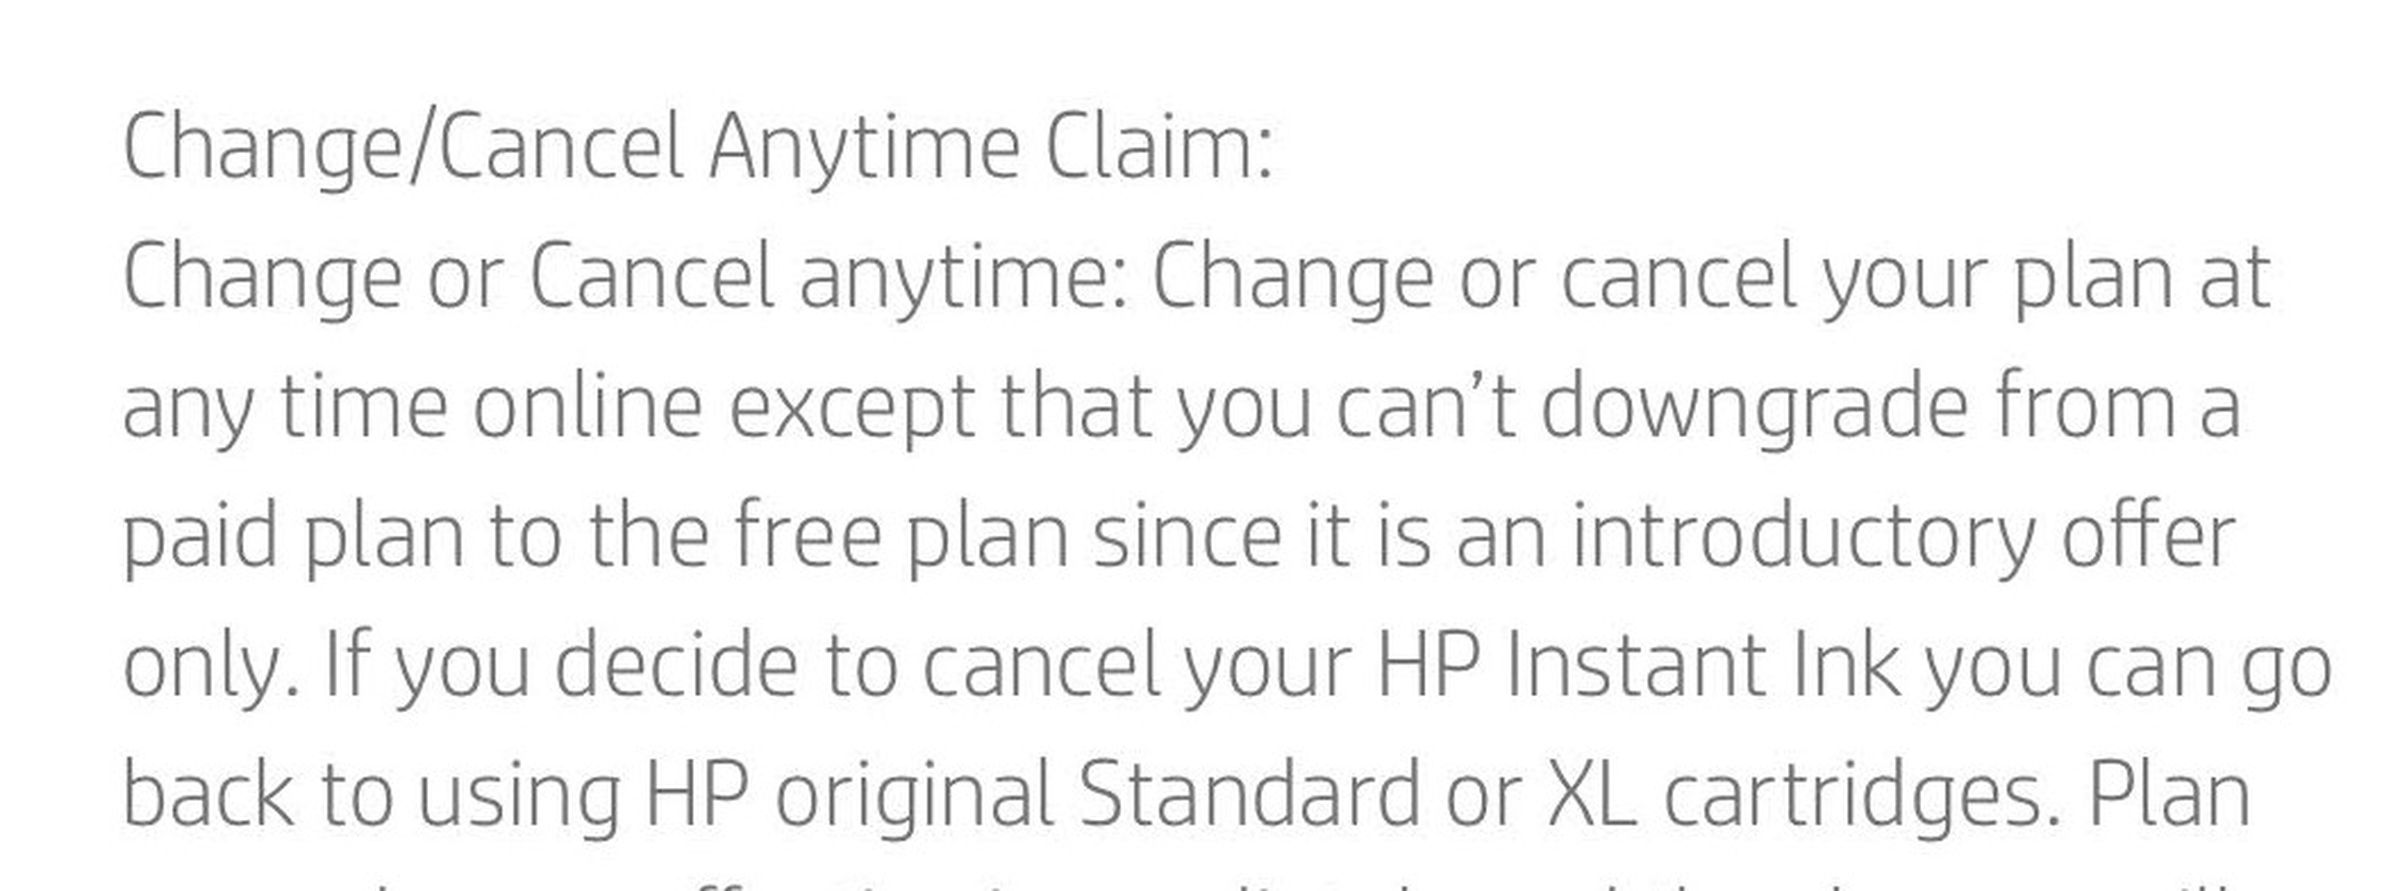 HP’s fine print about “change or cancel anytime.”